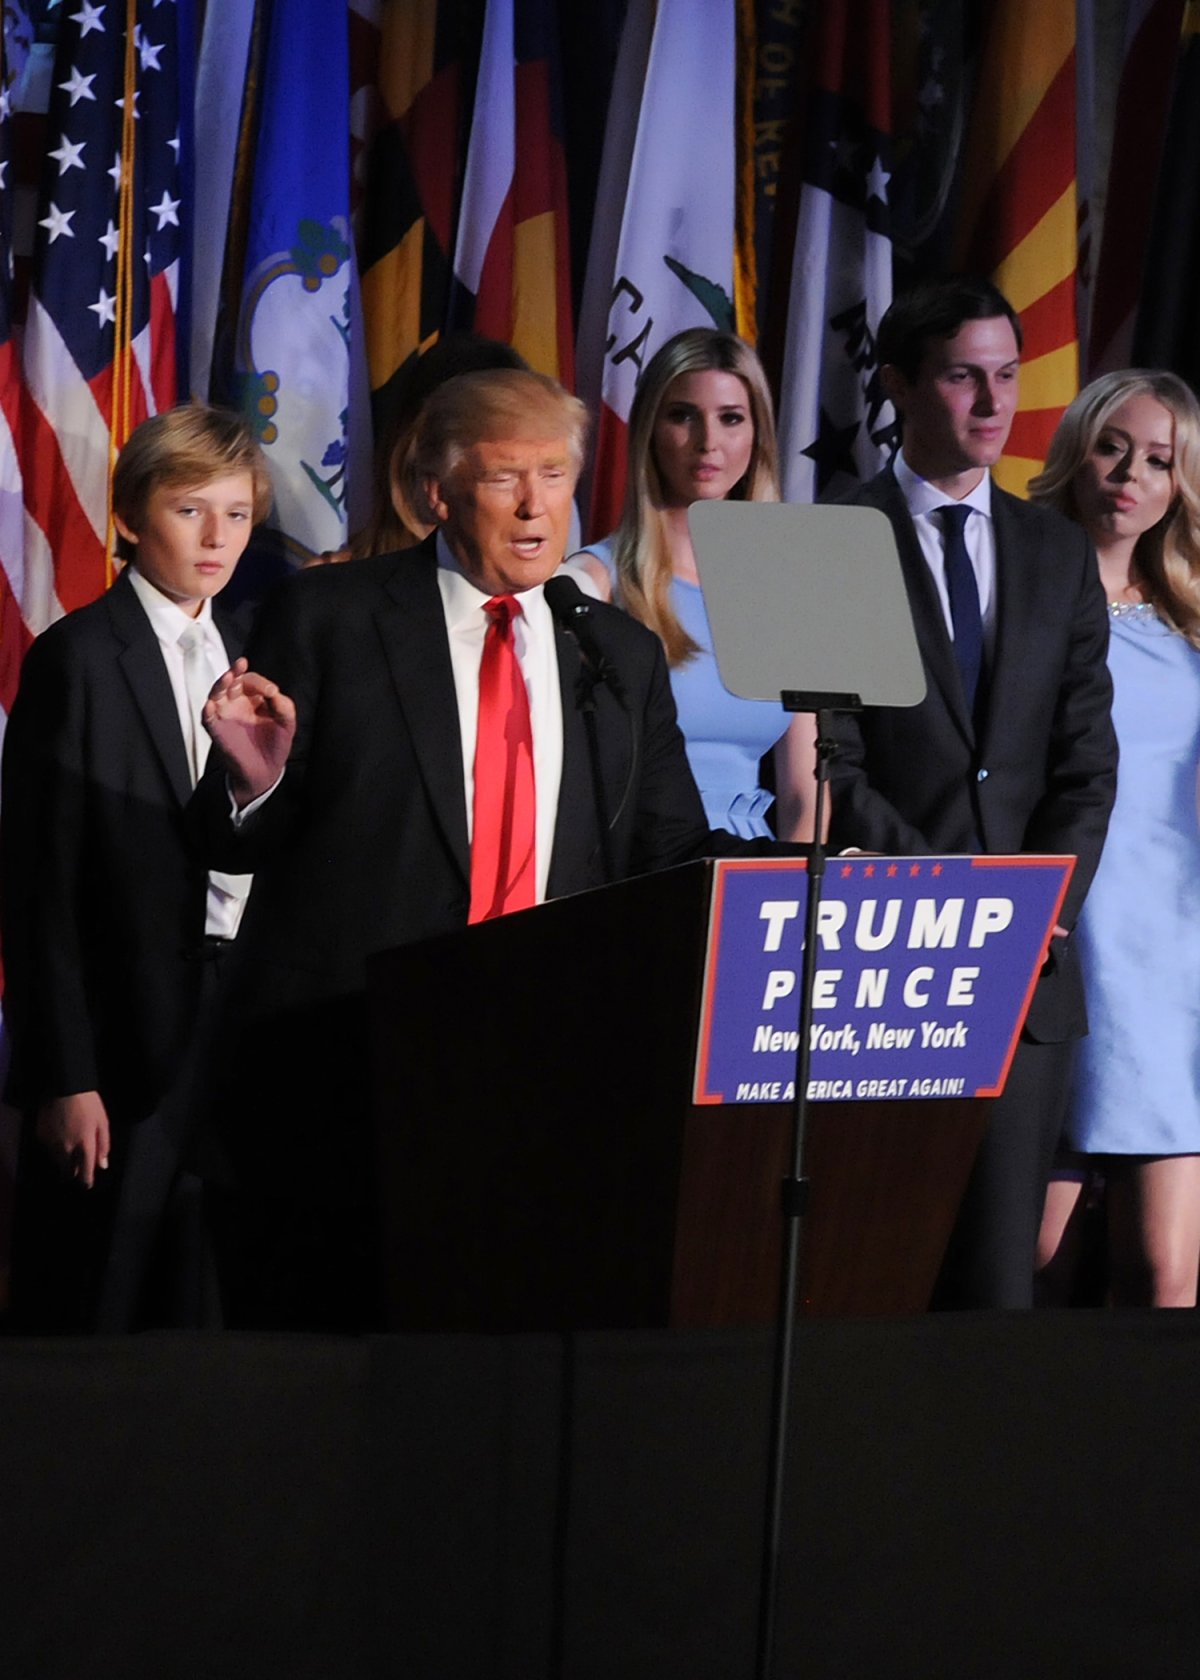 Donald Trump giving his victory speech early Wednesday morning at the New York Hilton hotel in Midtown, with, from left, his youngest son, Barron, his daughter Ivanka, her husband Jared Kushner — publisher of the Observer and a real estate owner in the East Village and Soho — and Melody, Trump's lesser-known daughter. Kushner has been accused of harassment by some tenants in his East Village buildings where renovations were being done.